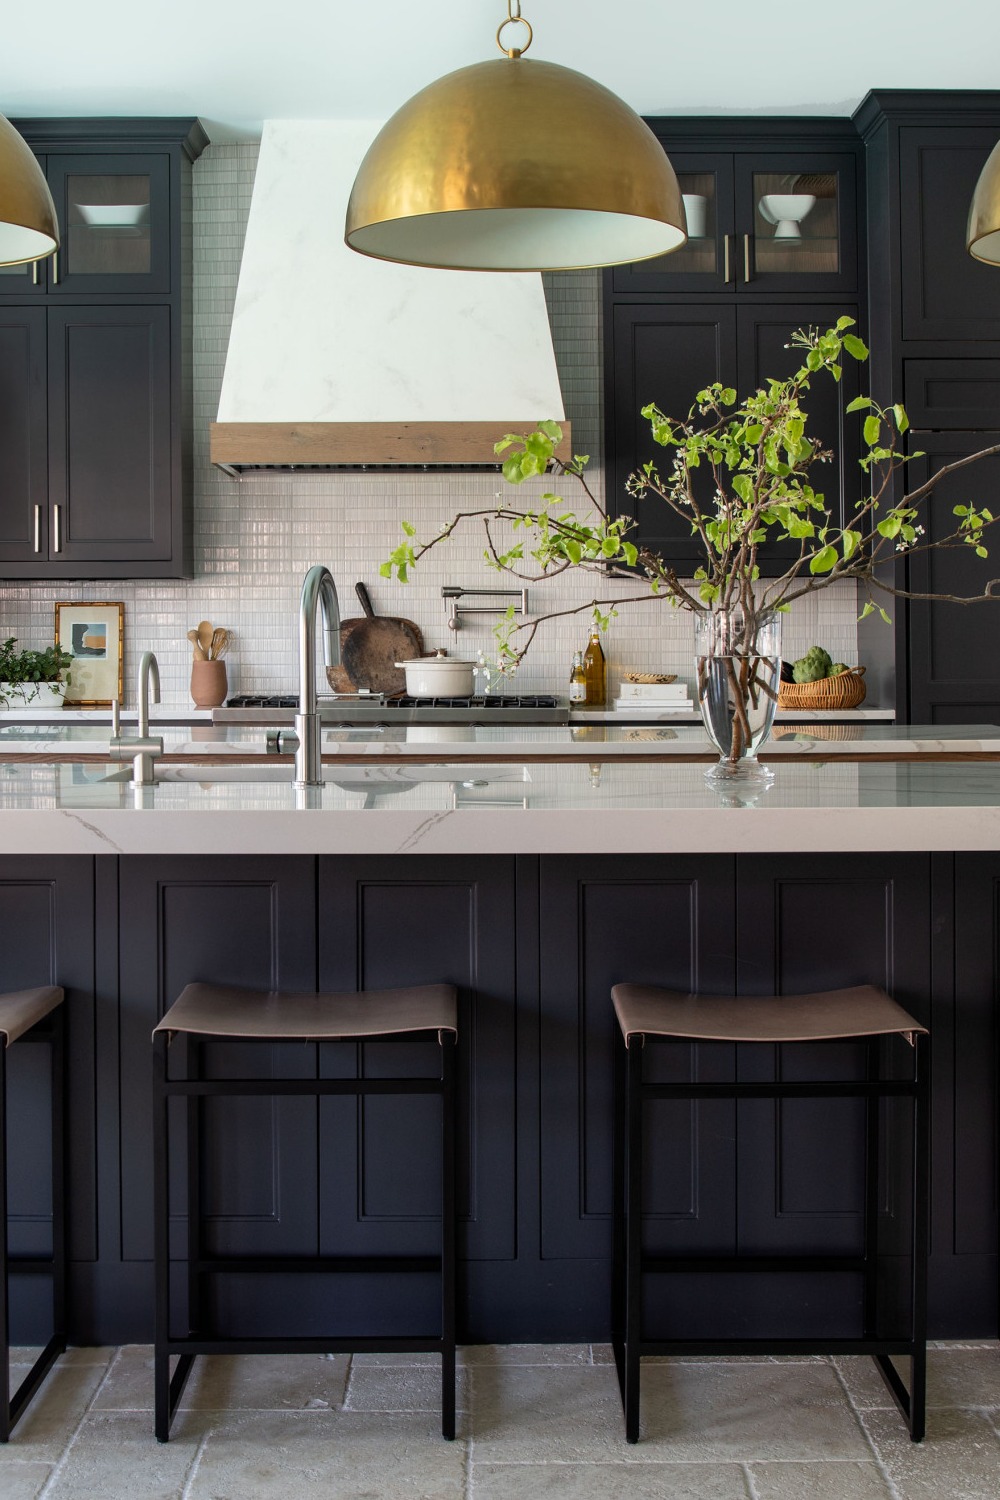 Transitional Black Kitchen Cabinets Black Background Whole Wall Clean Lines Dark Cabinetry Style Create